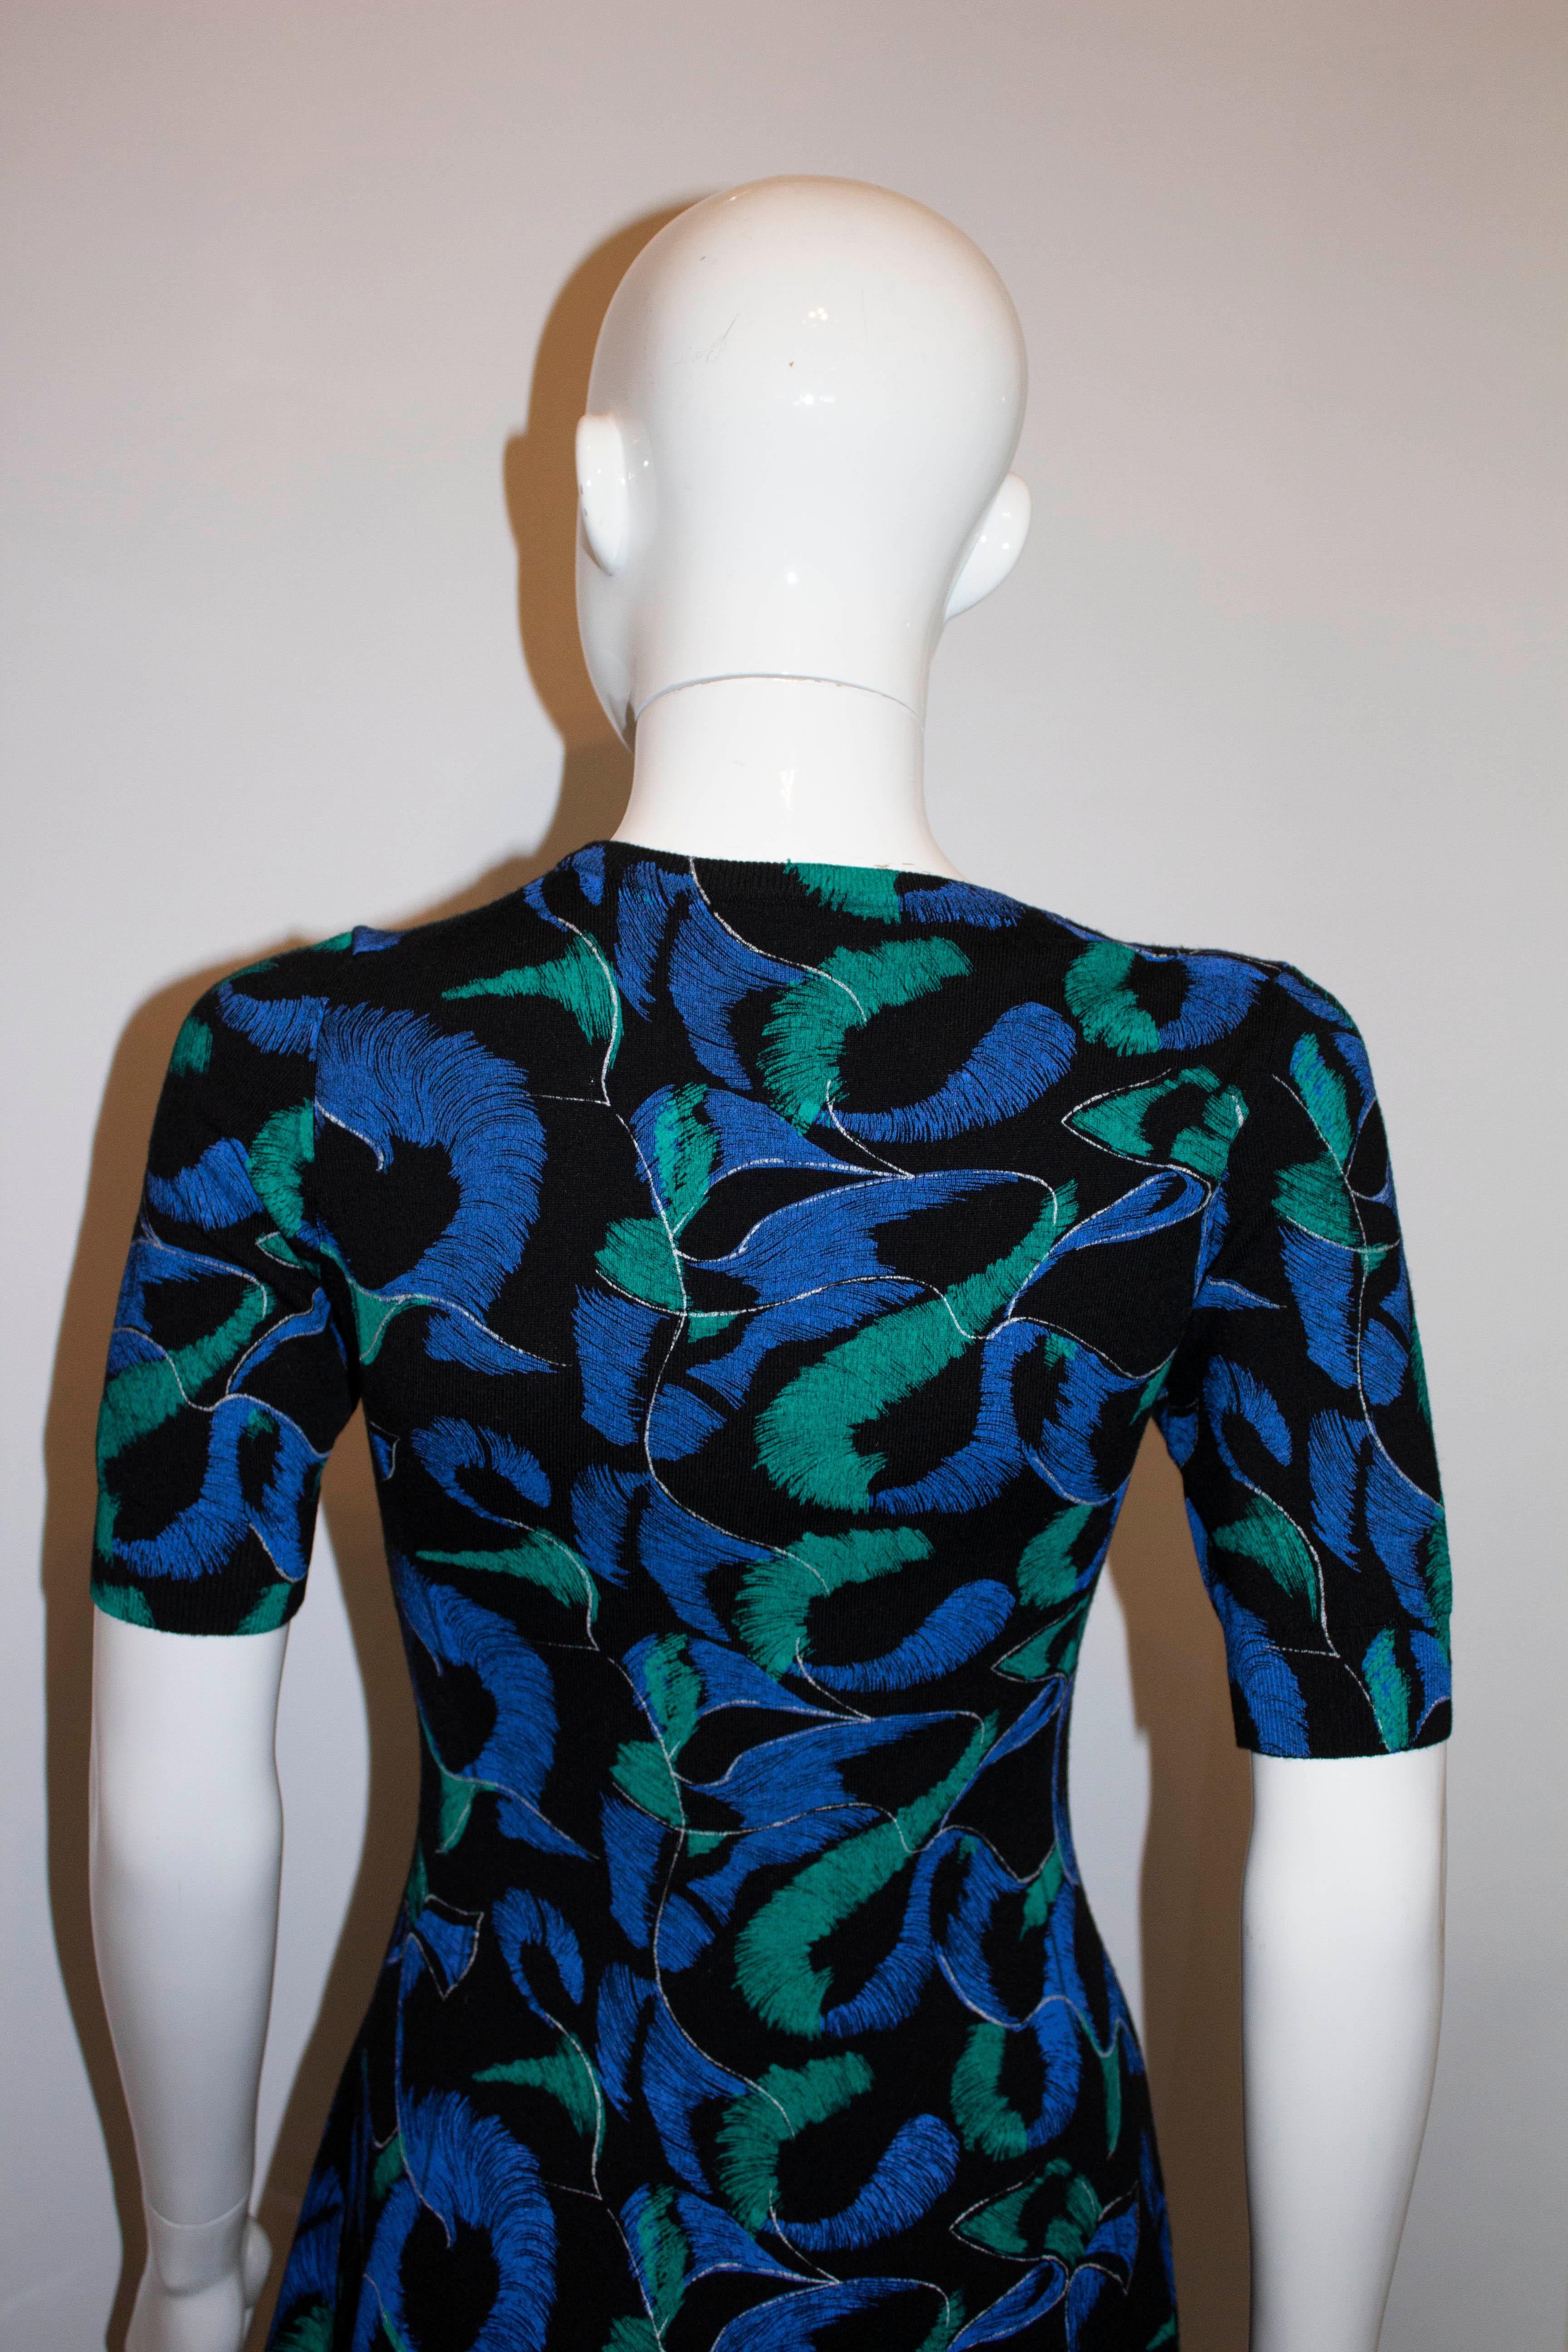 Kenzo Paris Spring Dress In Good Condition For Sale In London, GB